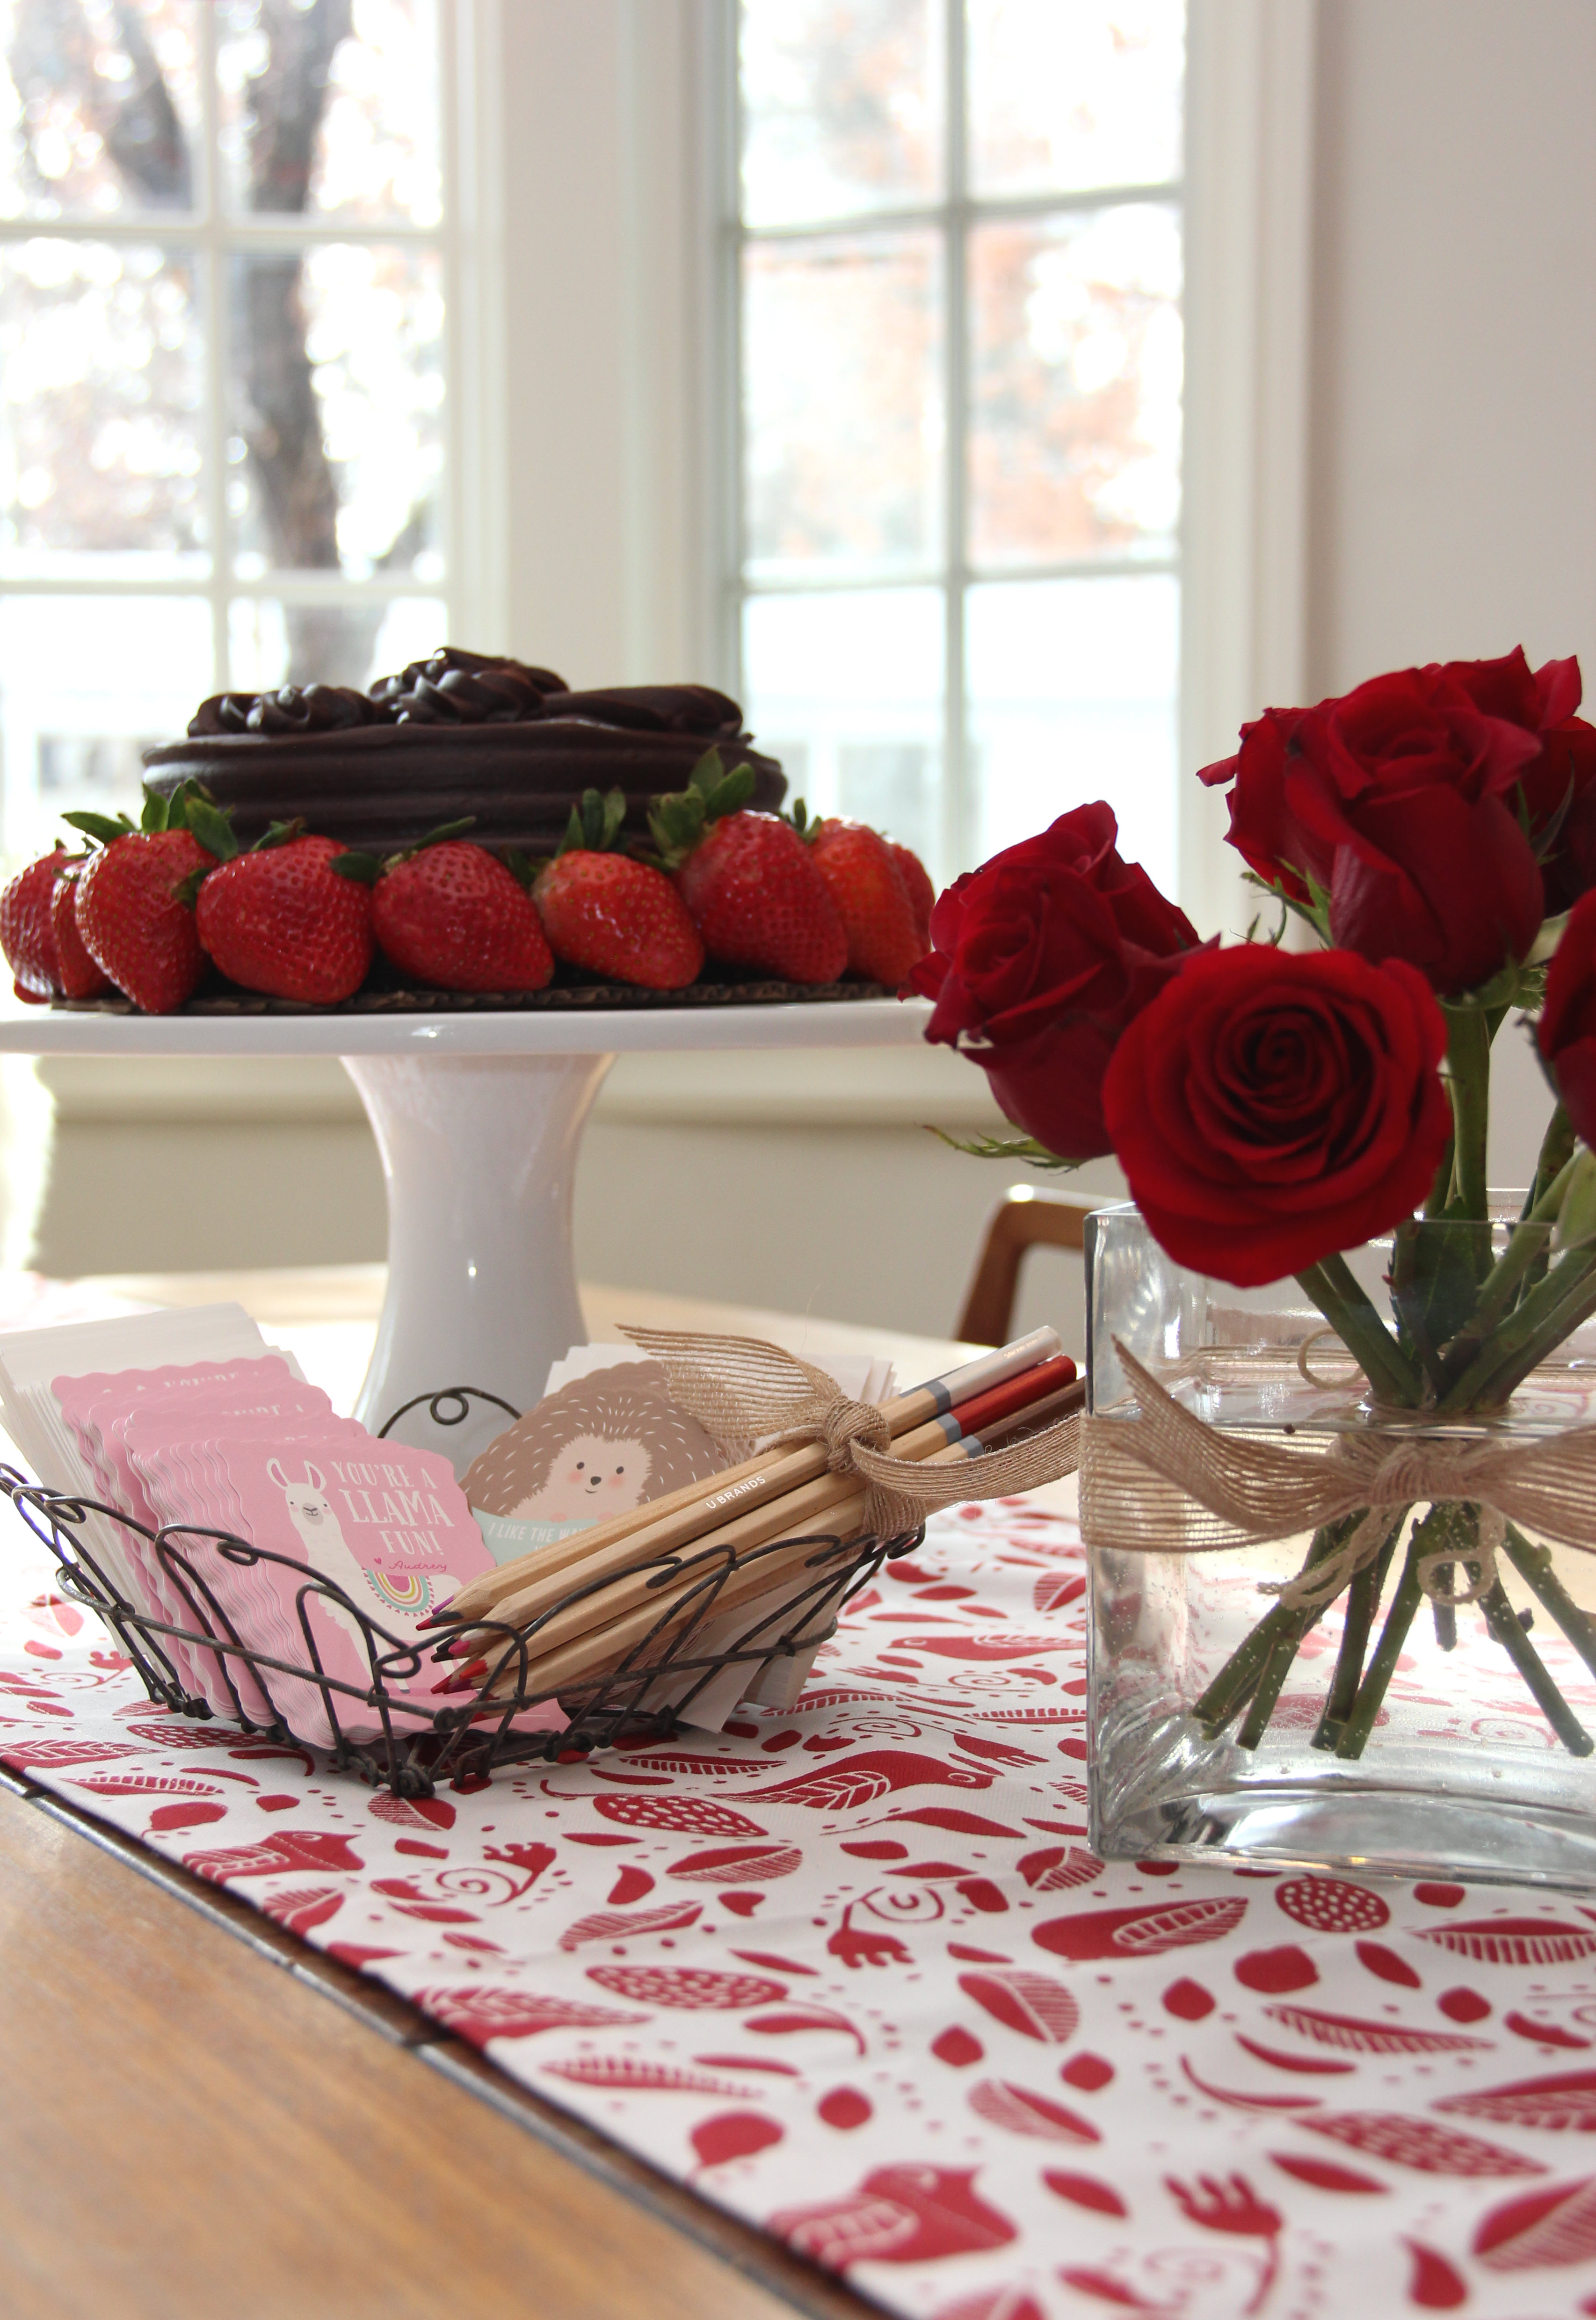 Decorating for Valentine's Day - Simplified BeeSimplified Bee